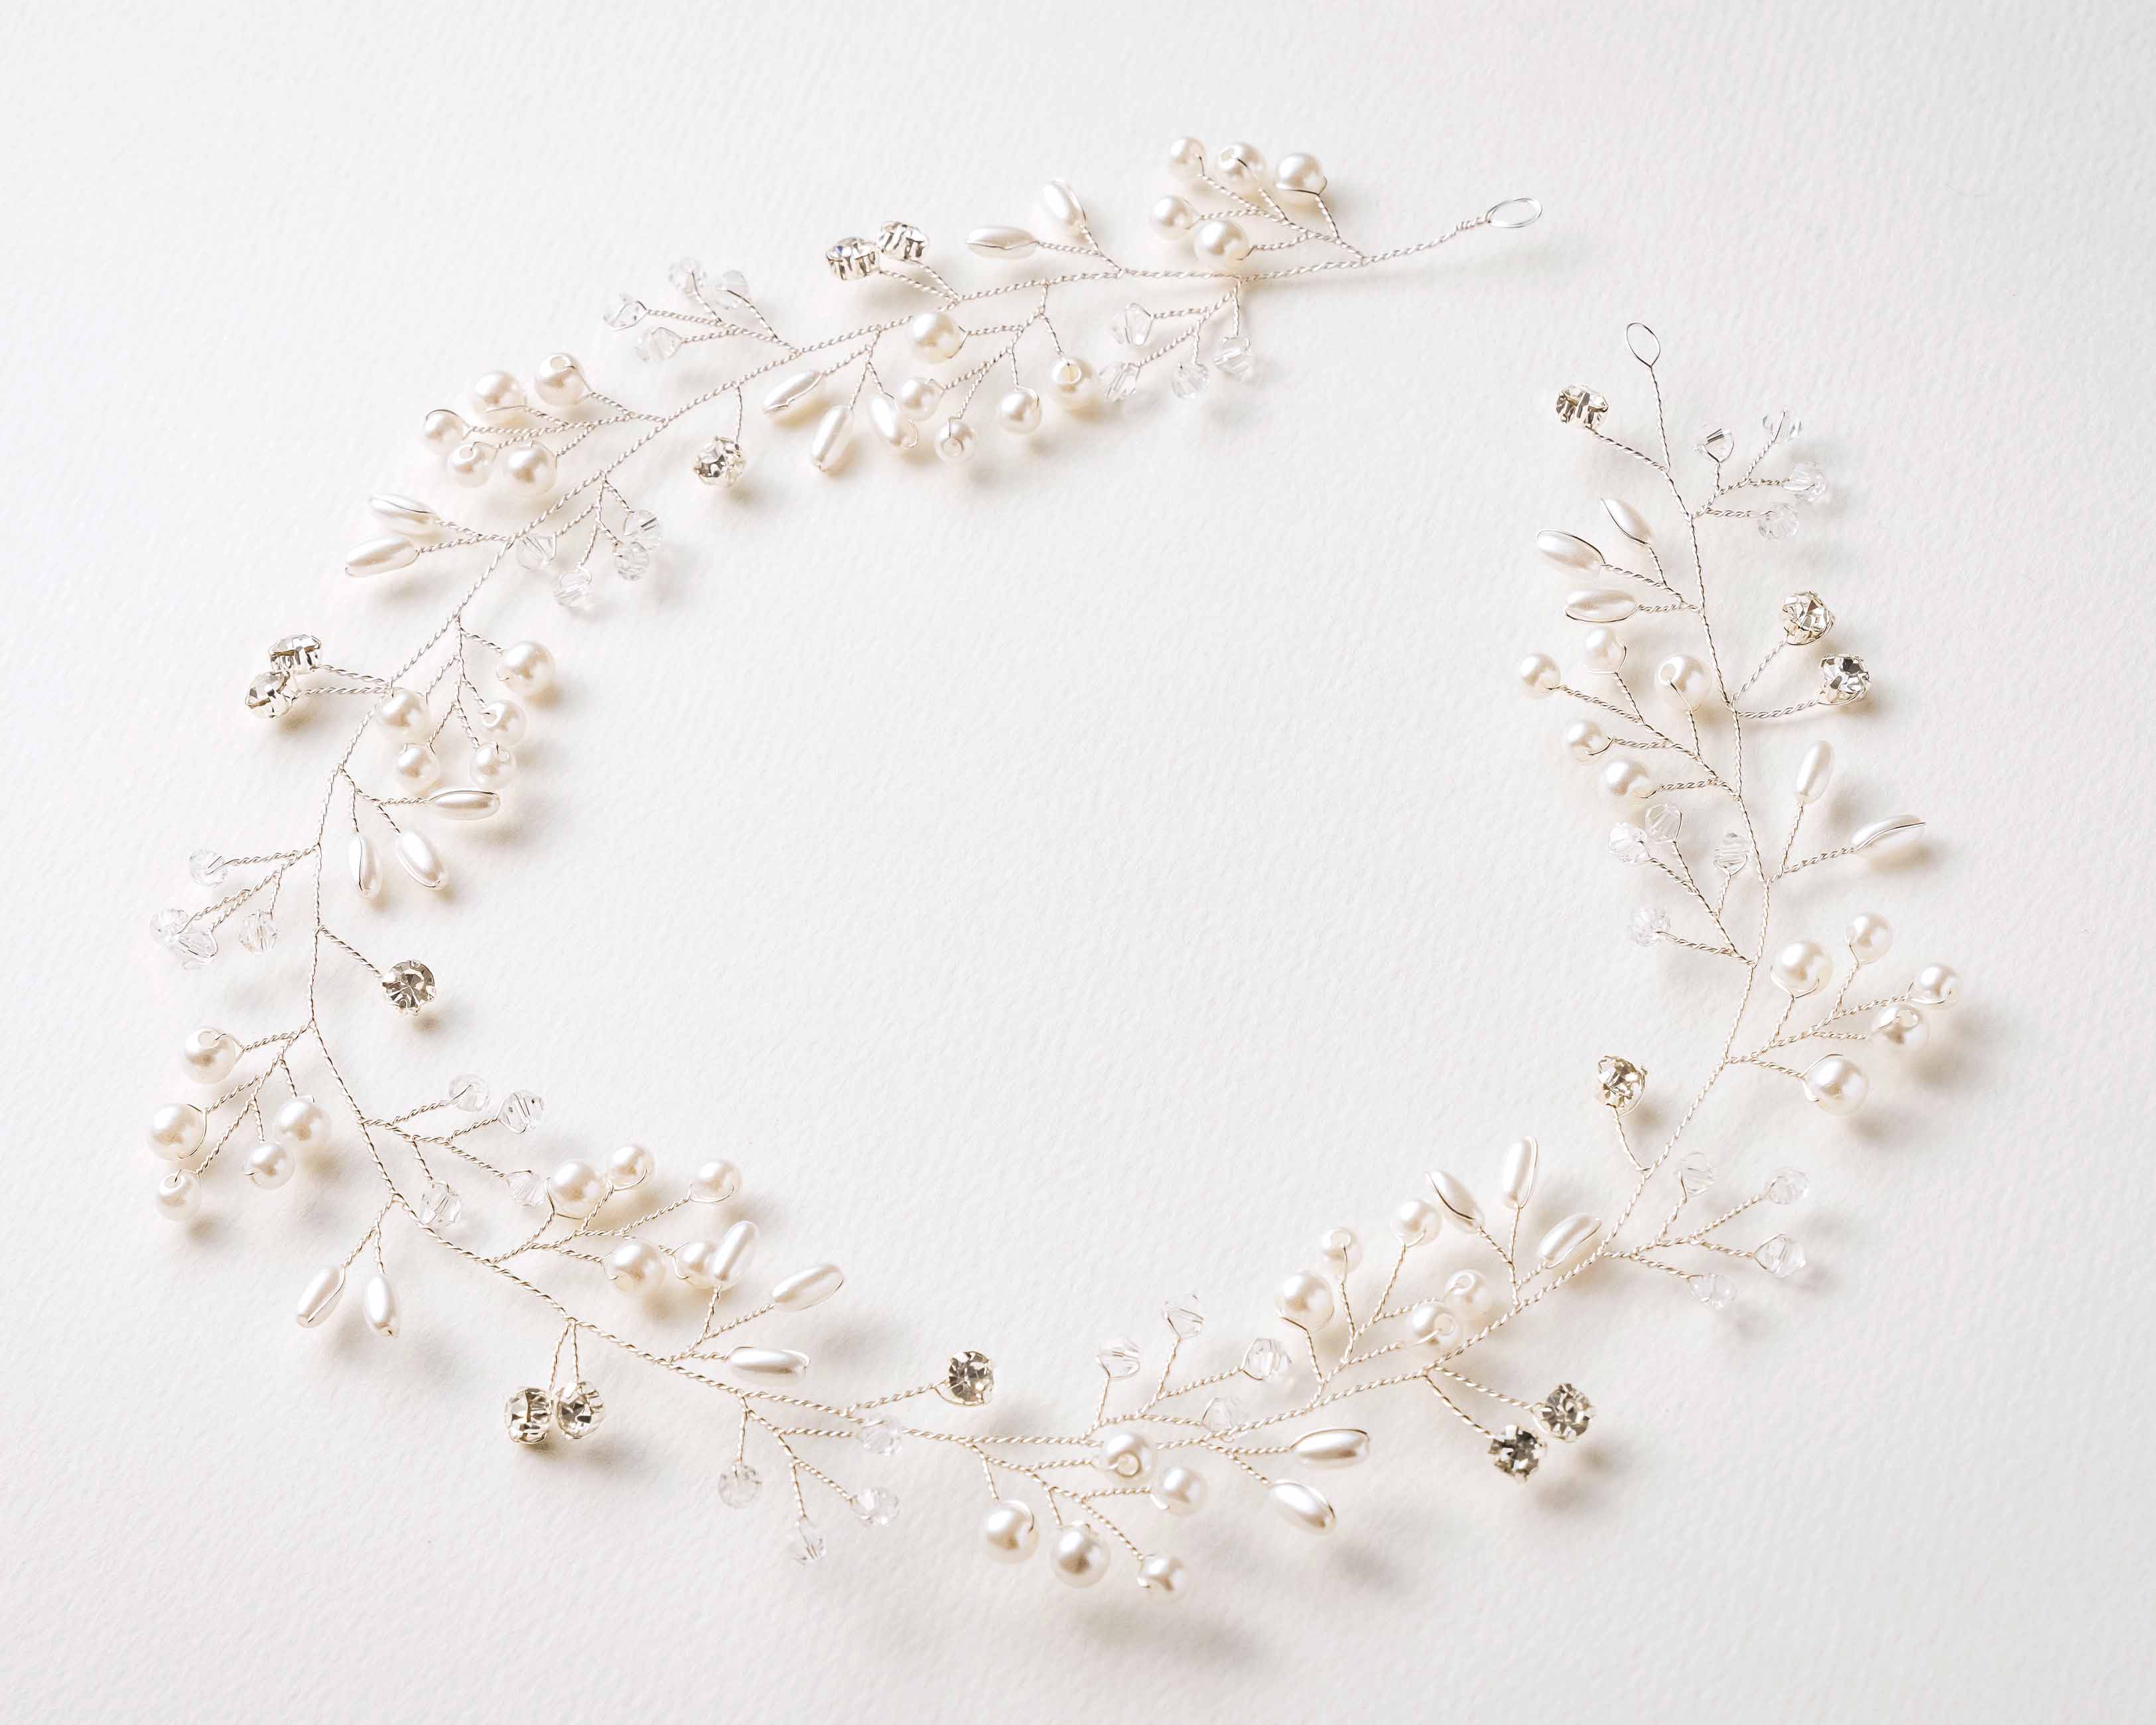 Enhance your bridal hairstyle with our exquisite wedding hair vines. Shop our bridal hair accessories is the perfect finishing touch to your special day look. 